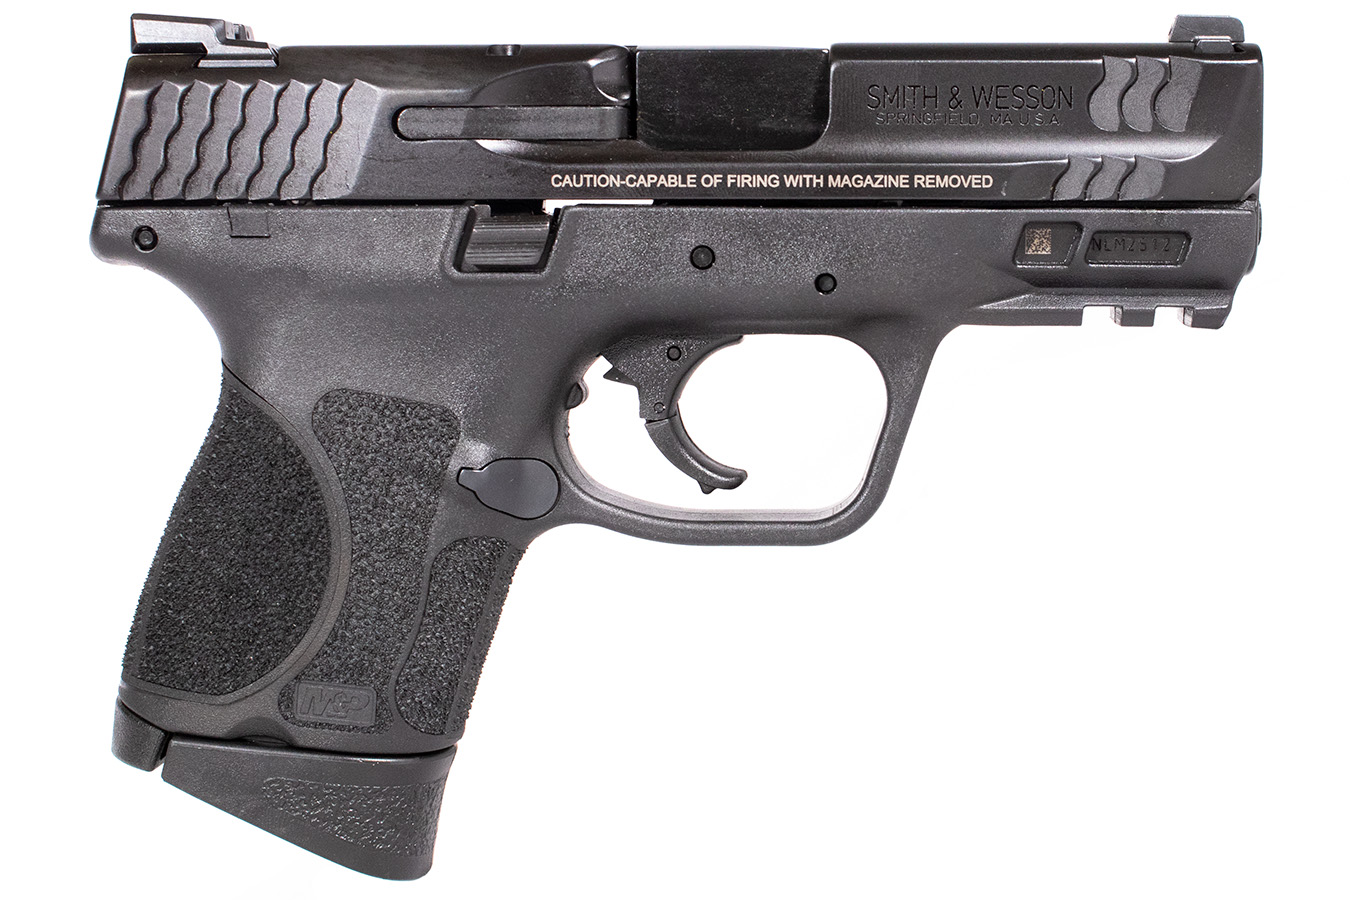 SMITH AND WESSON MP9 M2.0 COMPACT 9MM SEMI-AUTO PISTOL WITH NO THUMB SAFETY (LE)